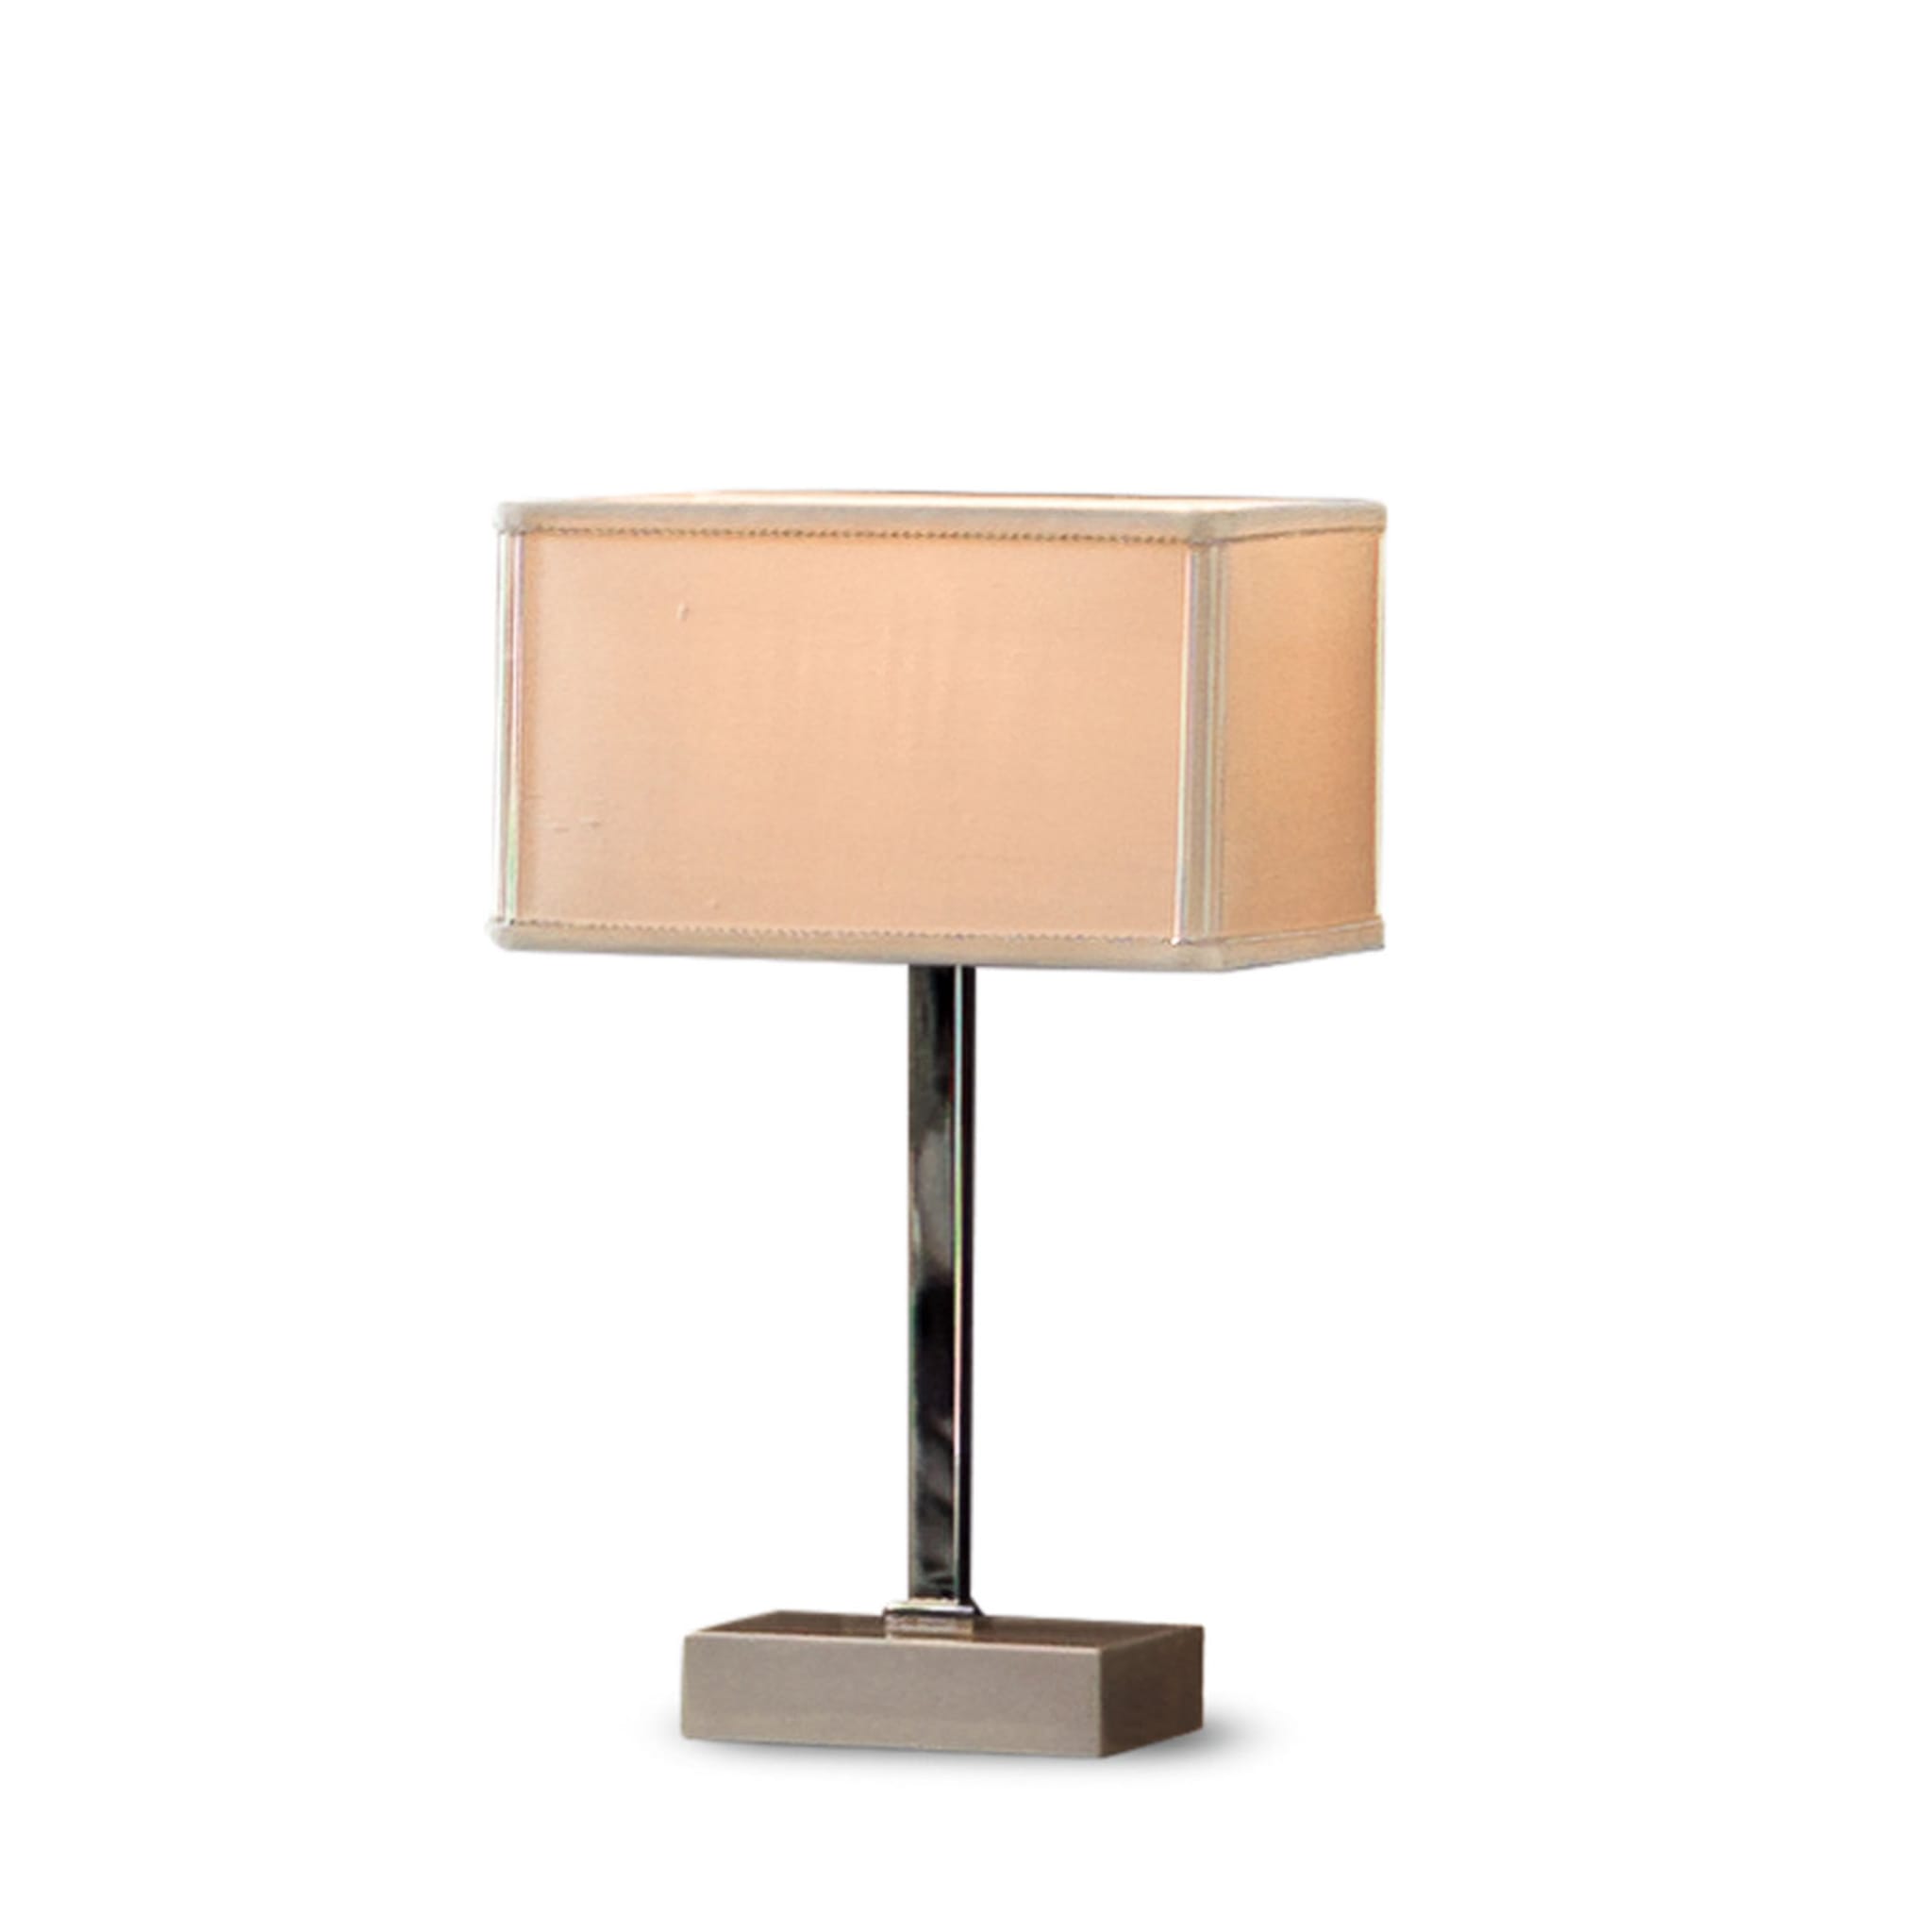 Keope Squared Table Lamp with Wooden Base - Main view